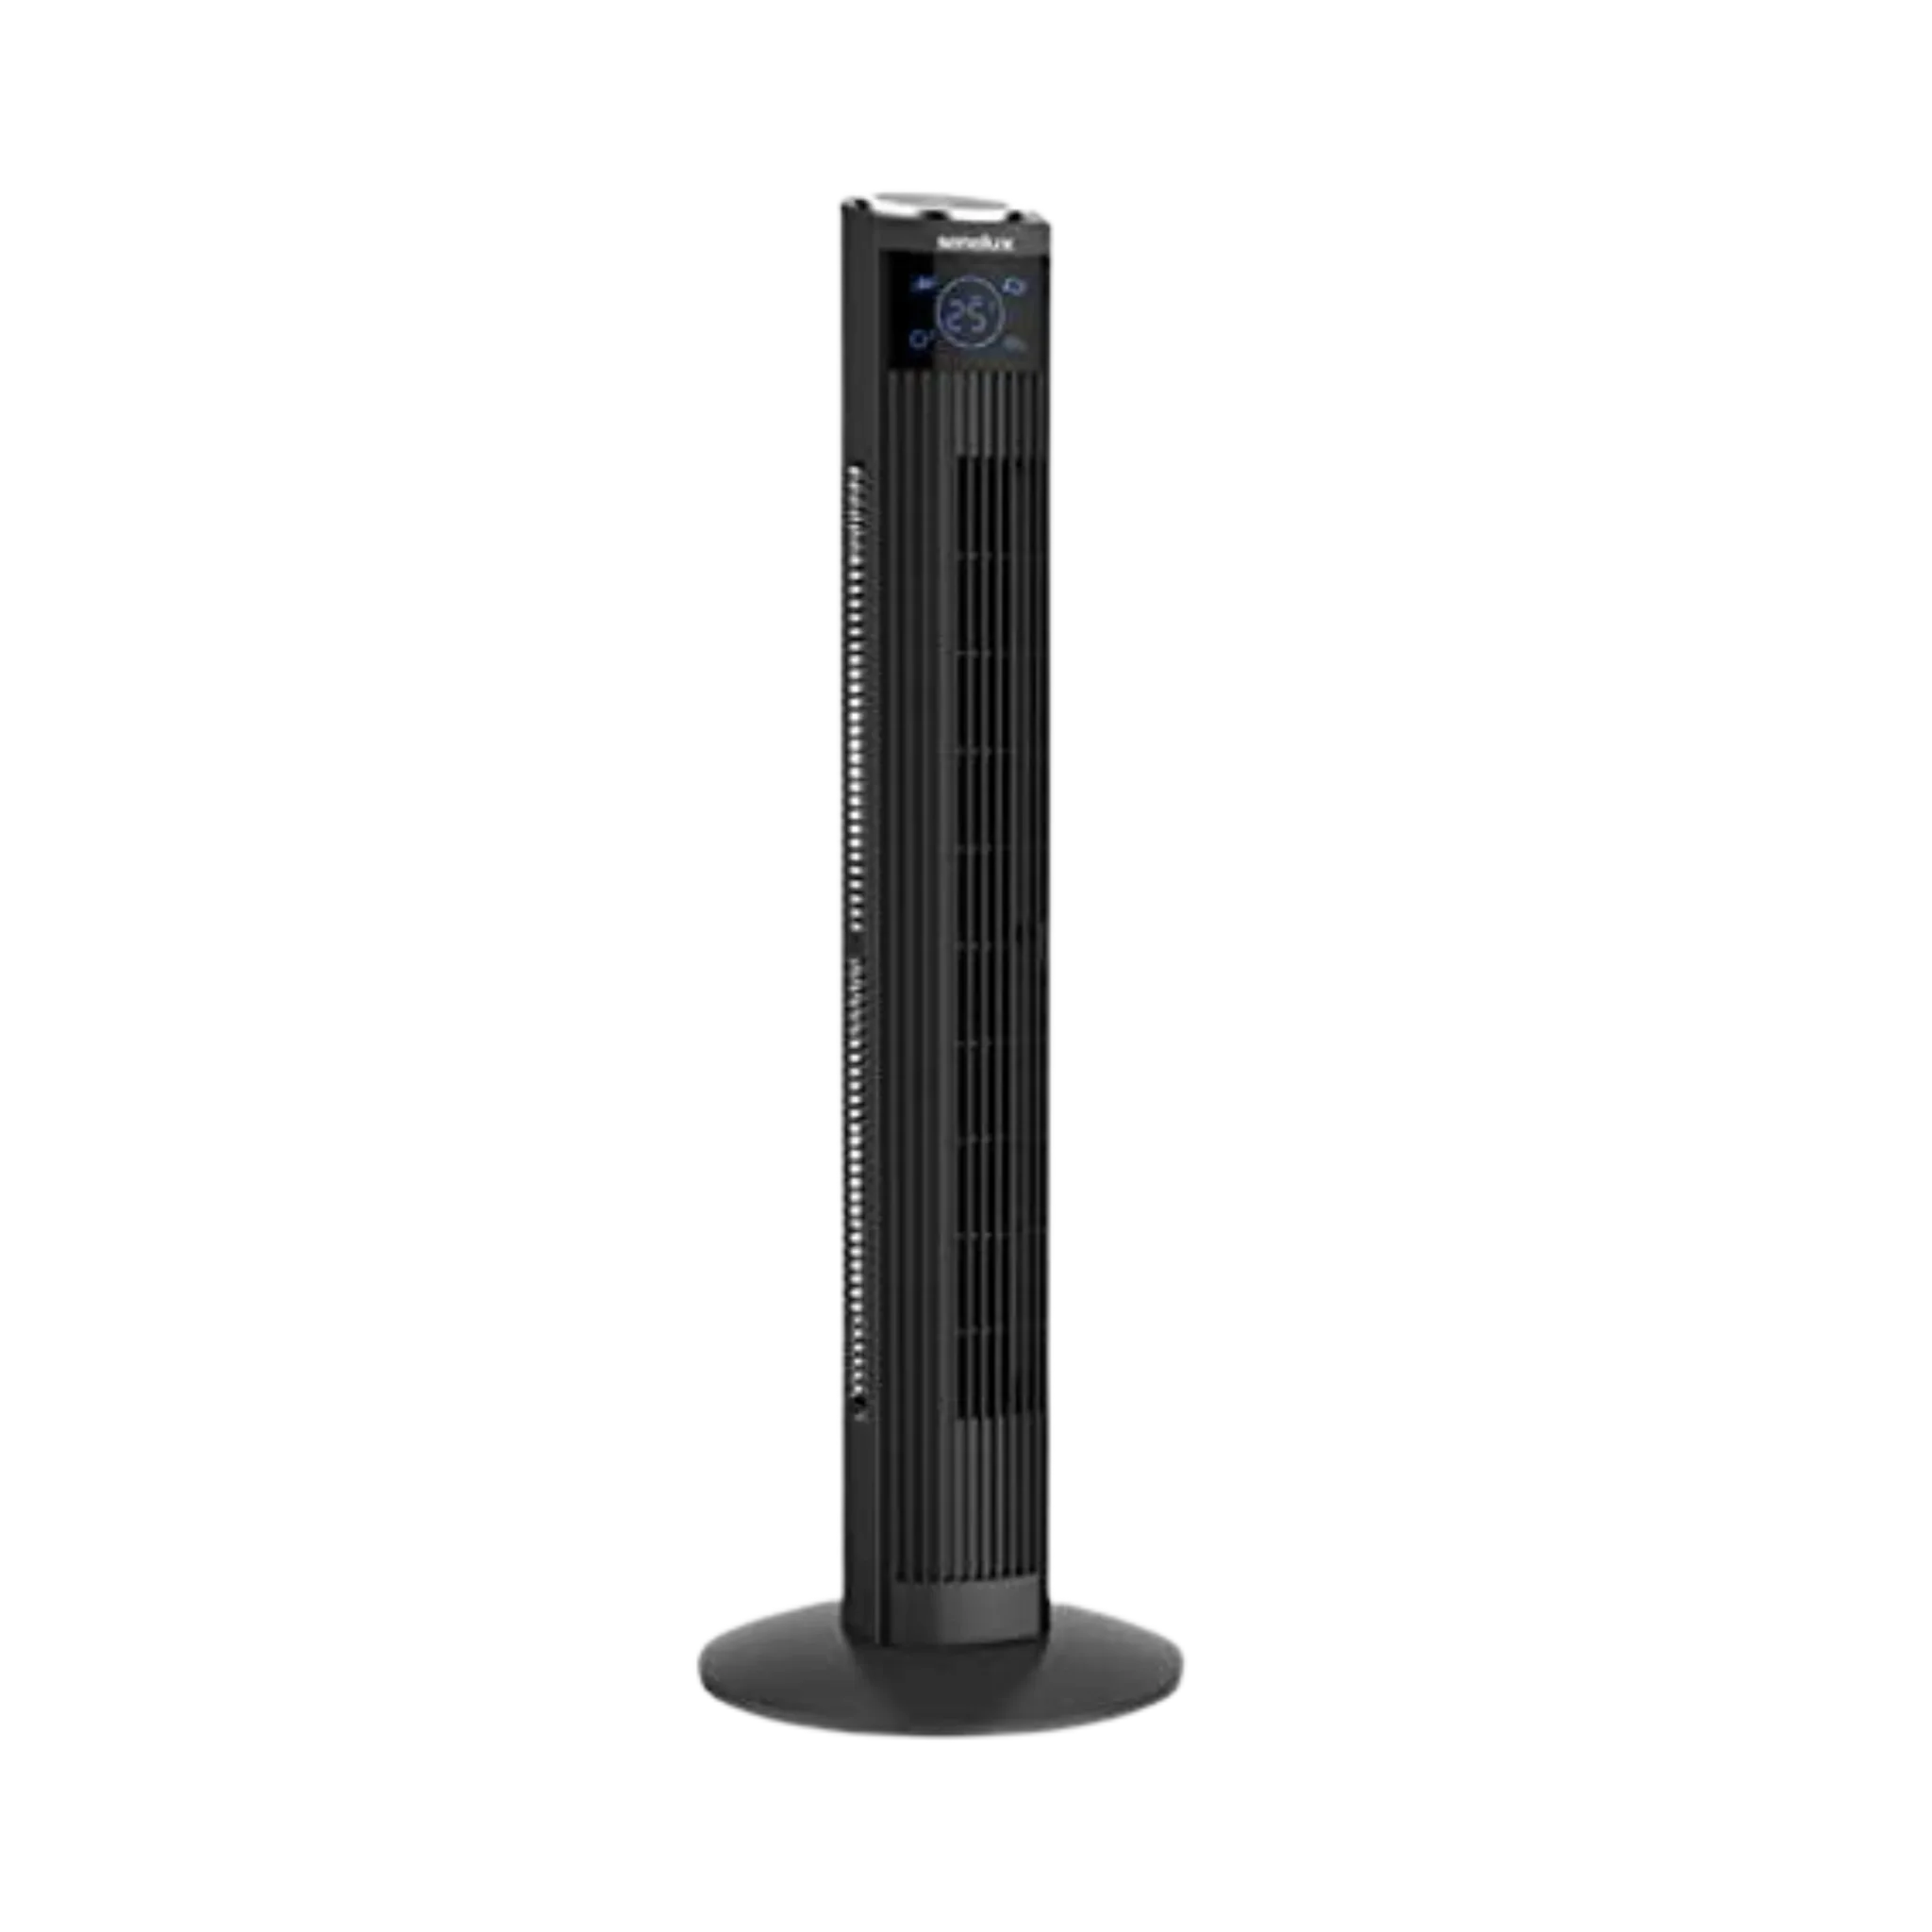 A picture of an all black 36 inch Senelux tower fan with an LED wind speed display located near the top.